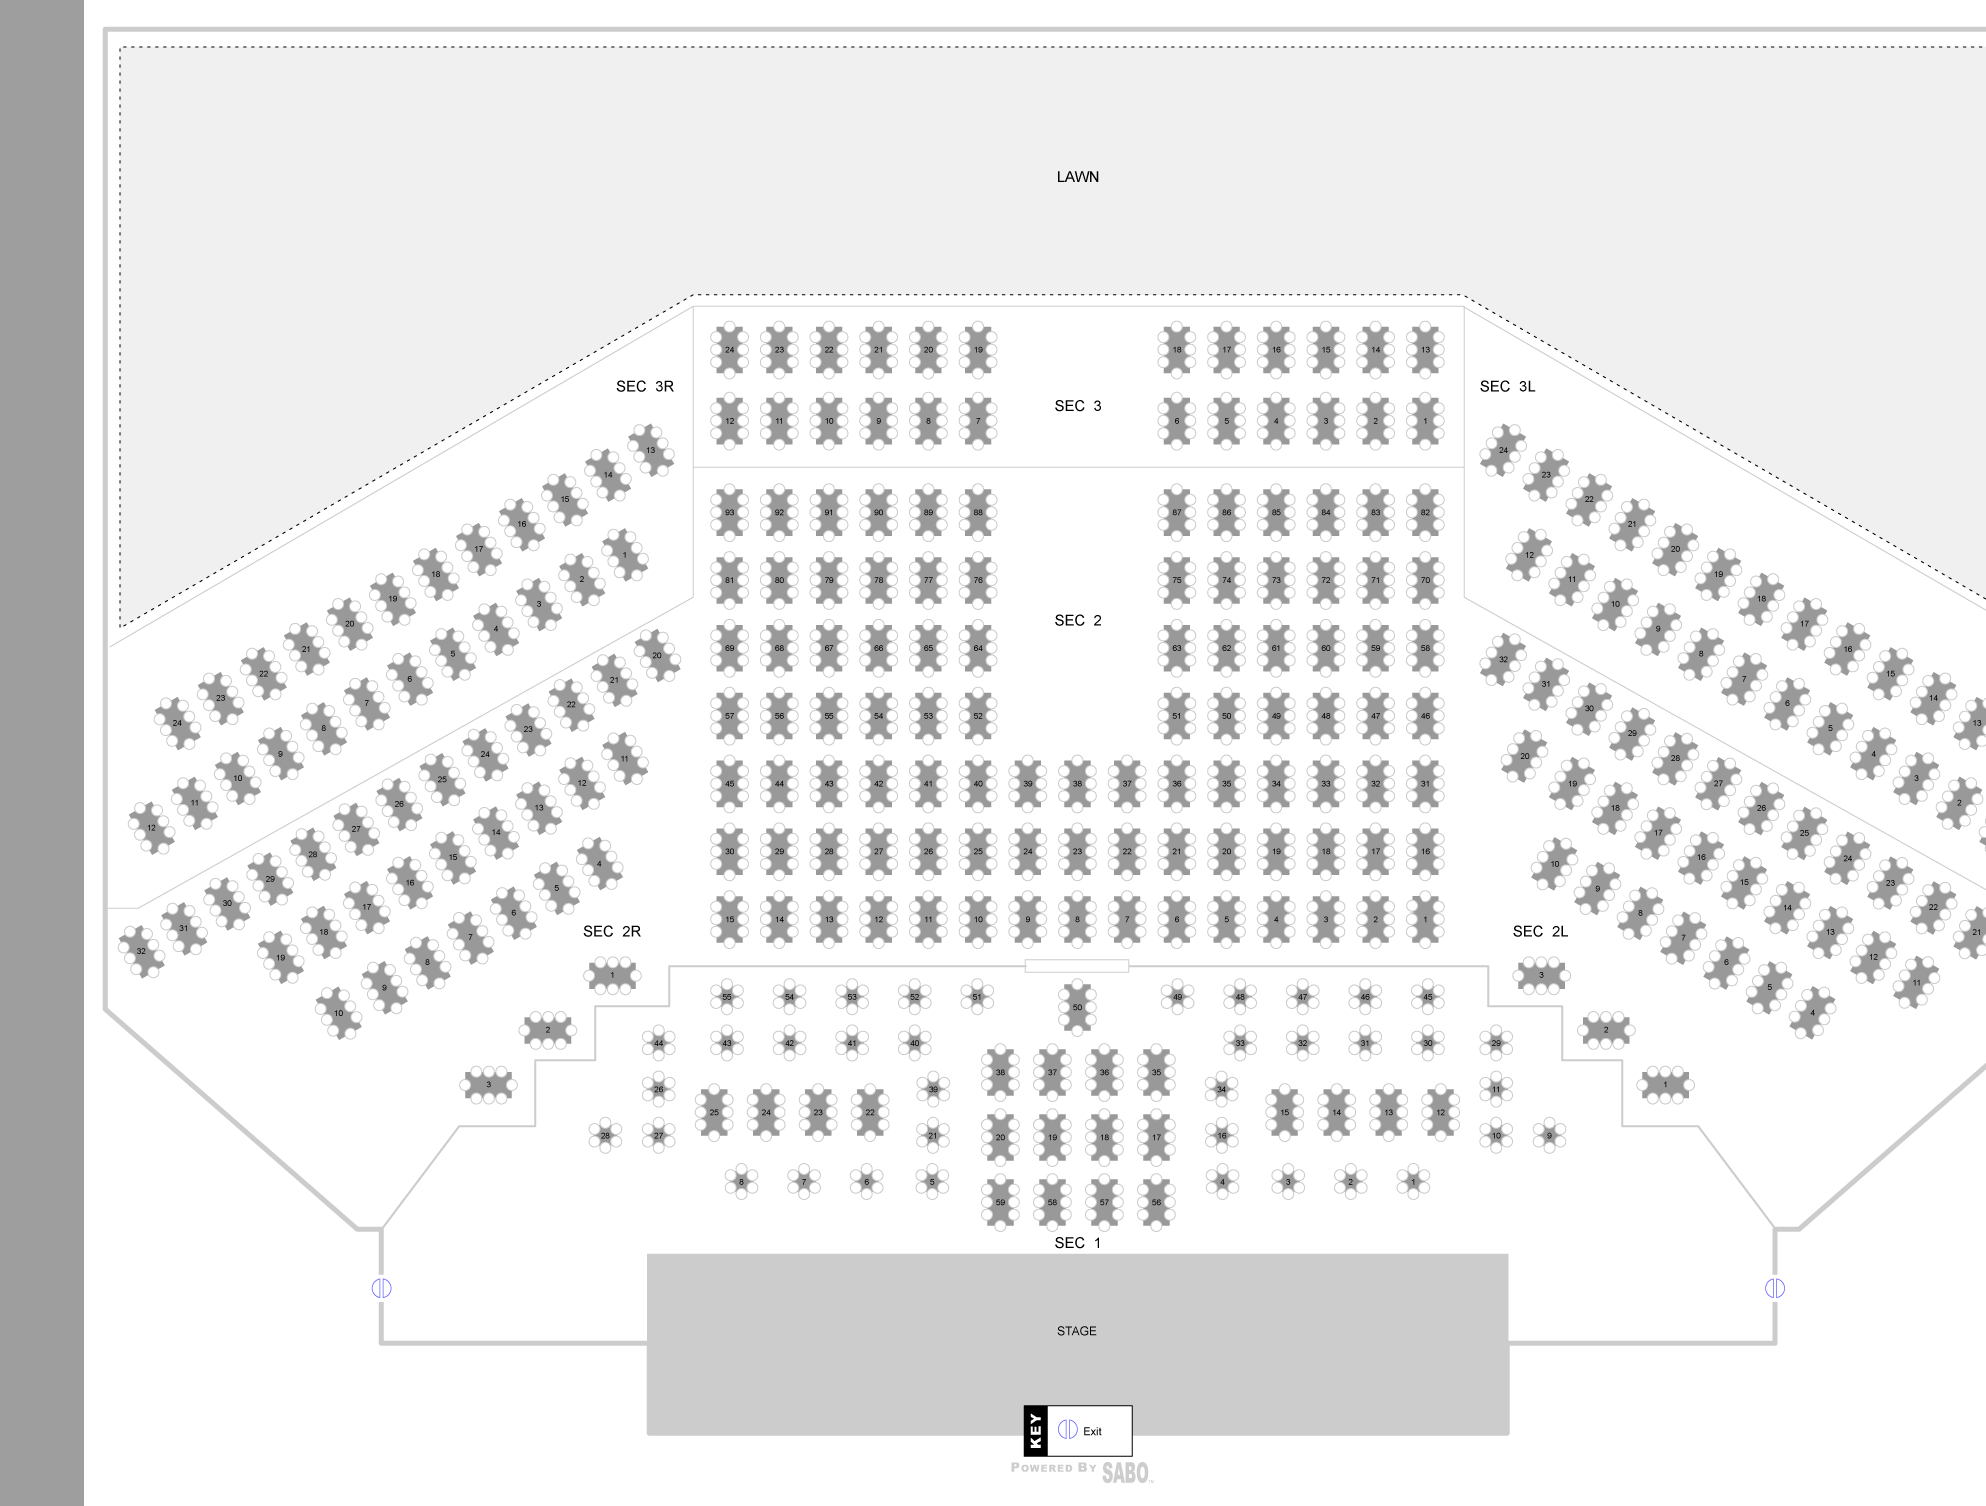 Jiffy Lube Live Seating Chart Seat Numbers